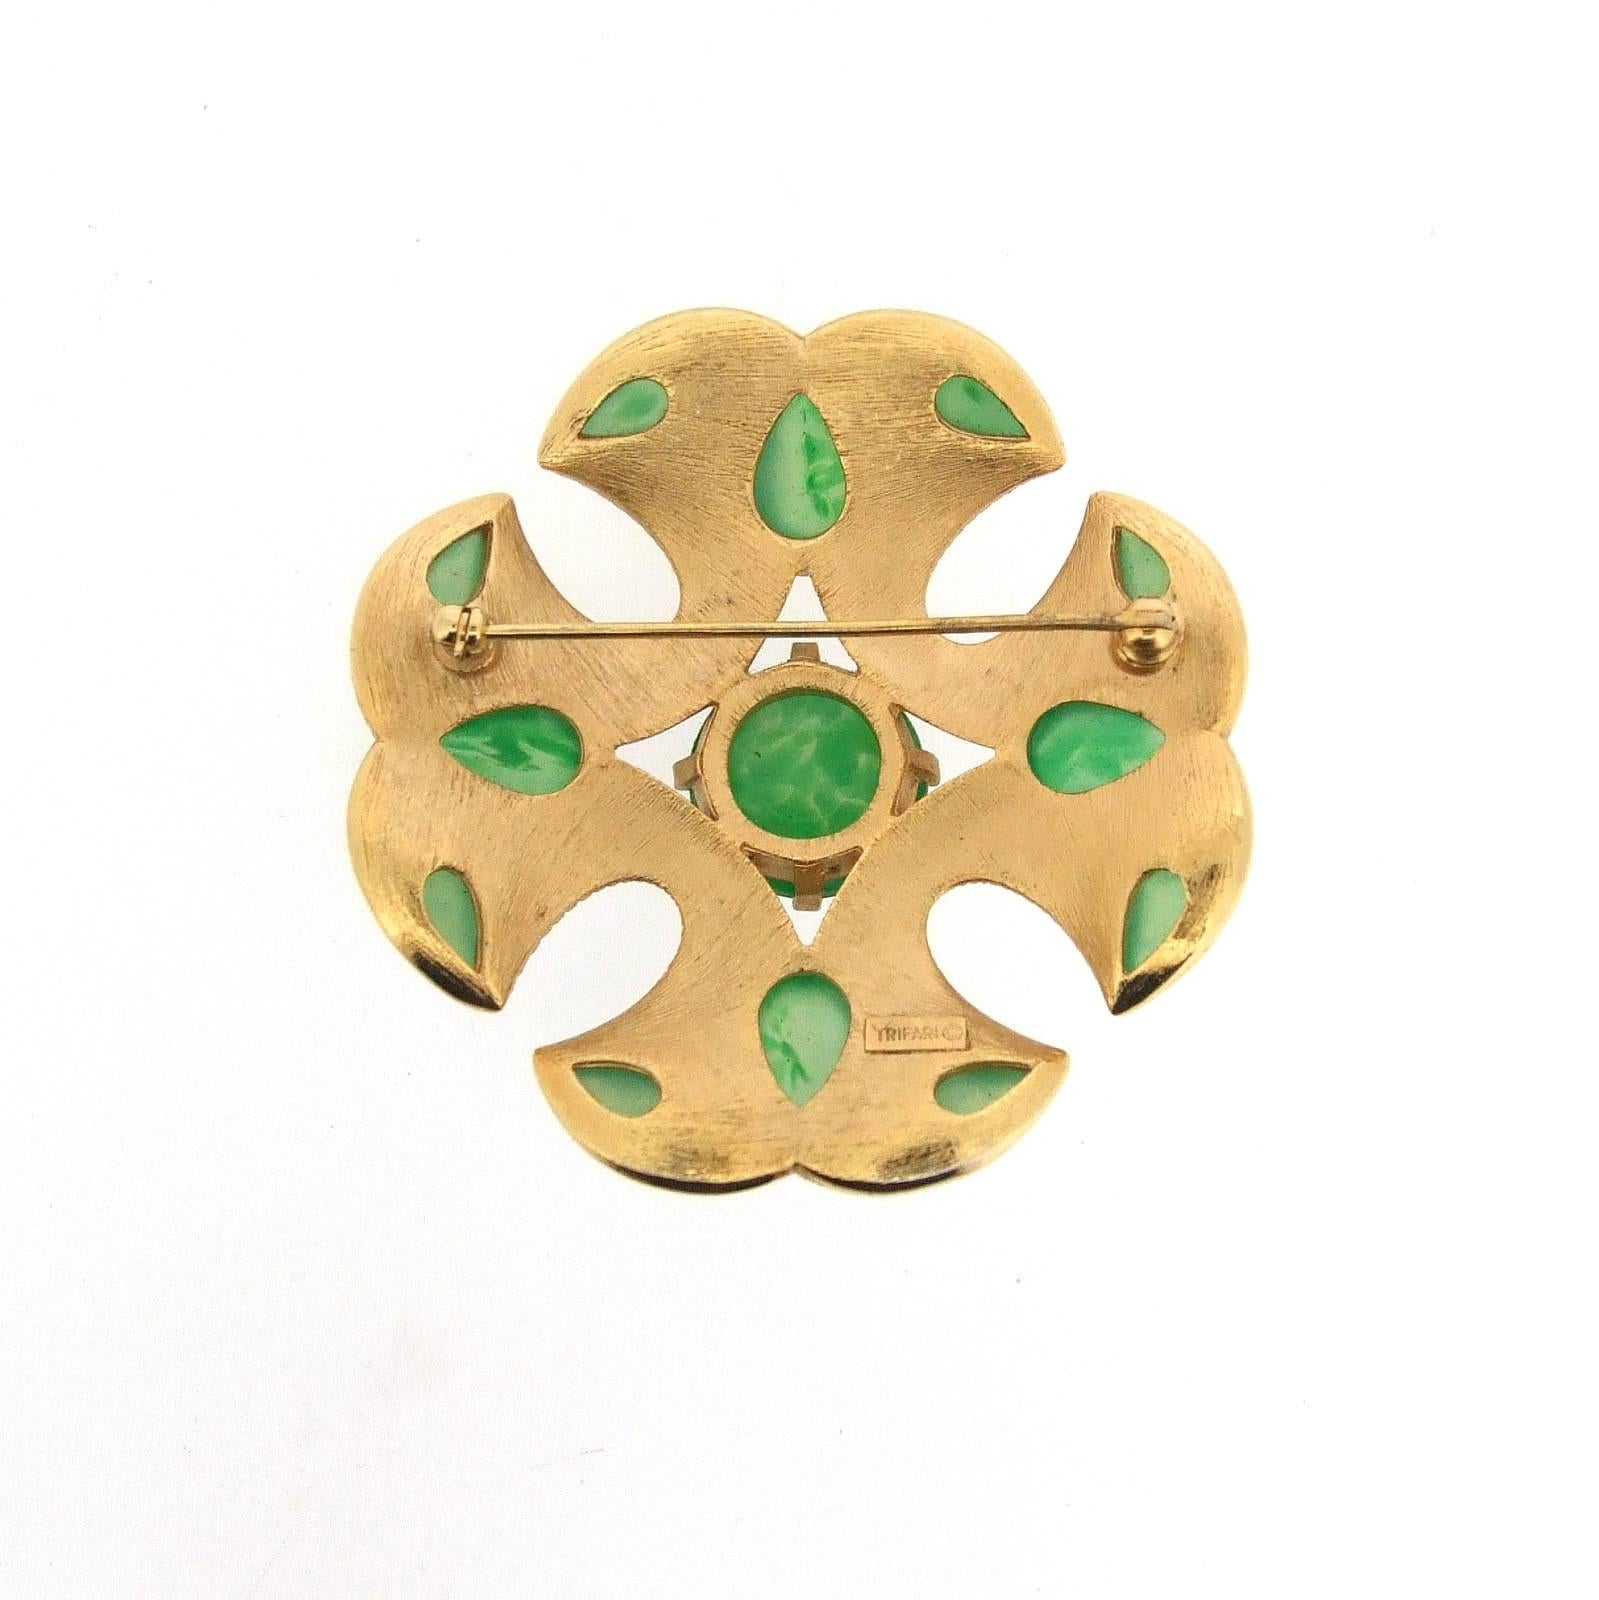 Anglo-Indian 1965 Trifari Brooch Jade Glass Jewels of India Collection